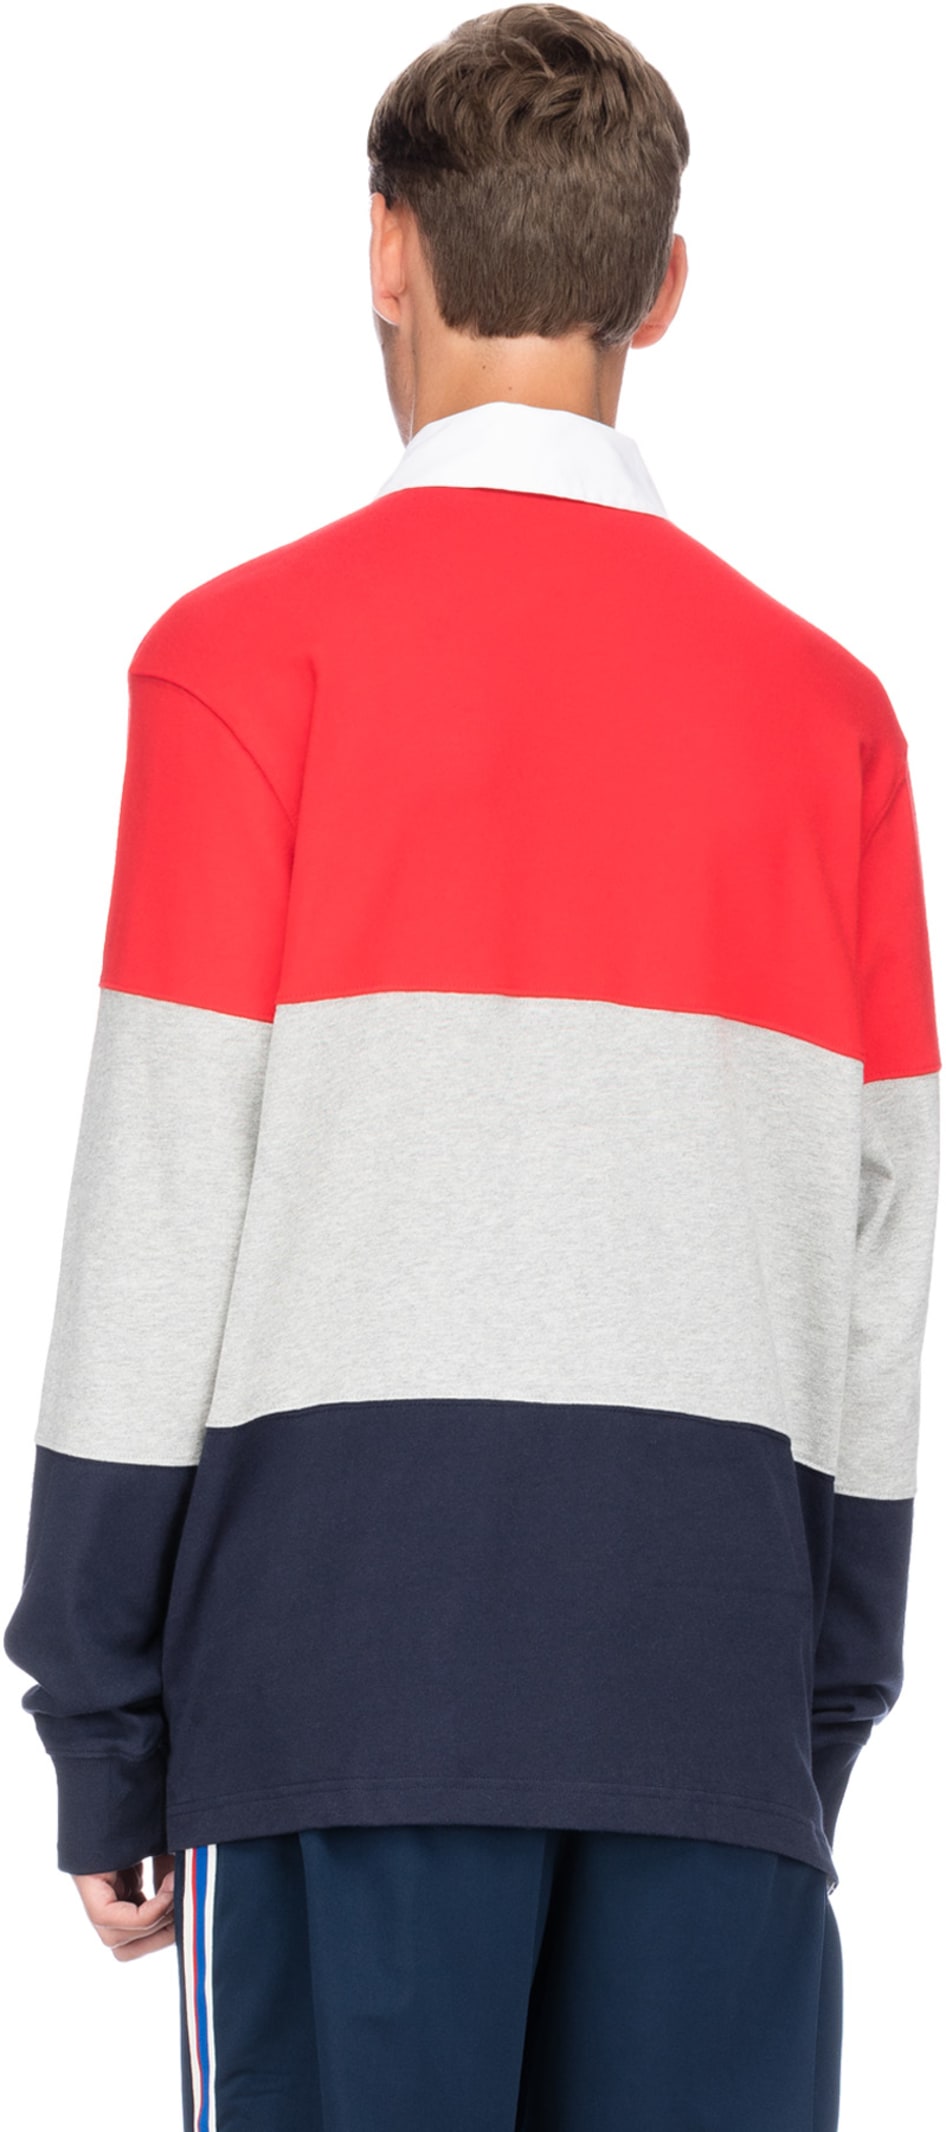 champion colorblock rugby shirt